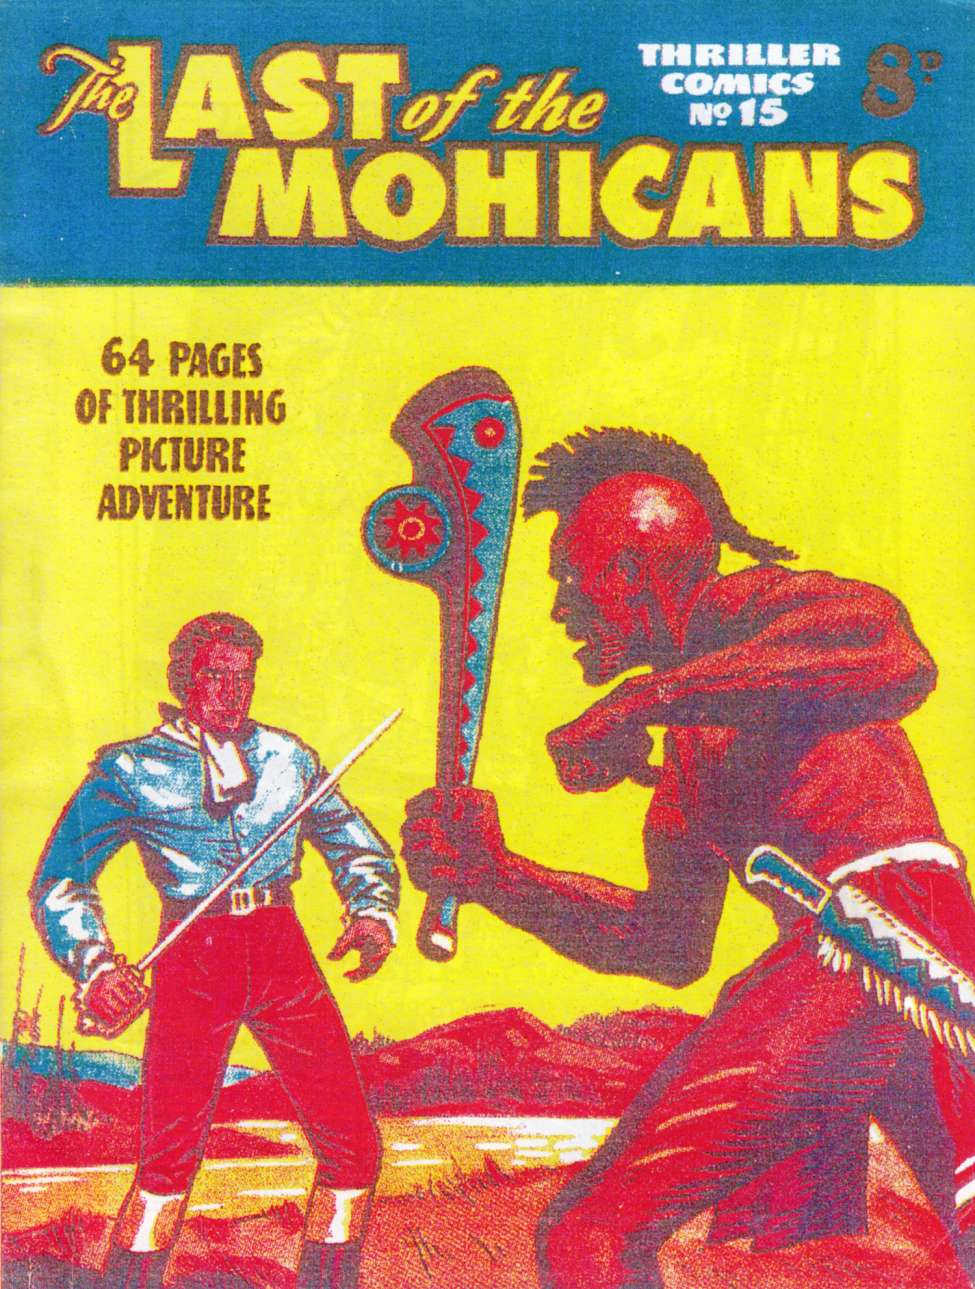 Book Cover For Thriller Comics 15 - The Last of the Mohicans